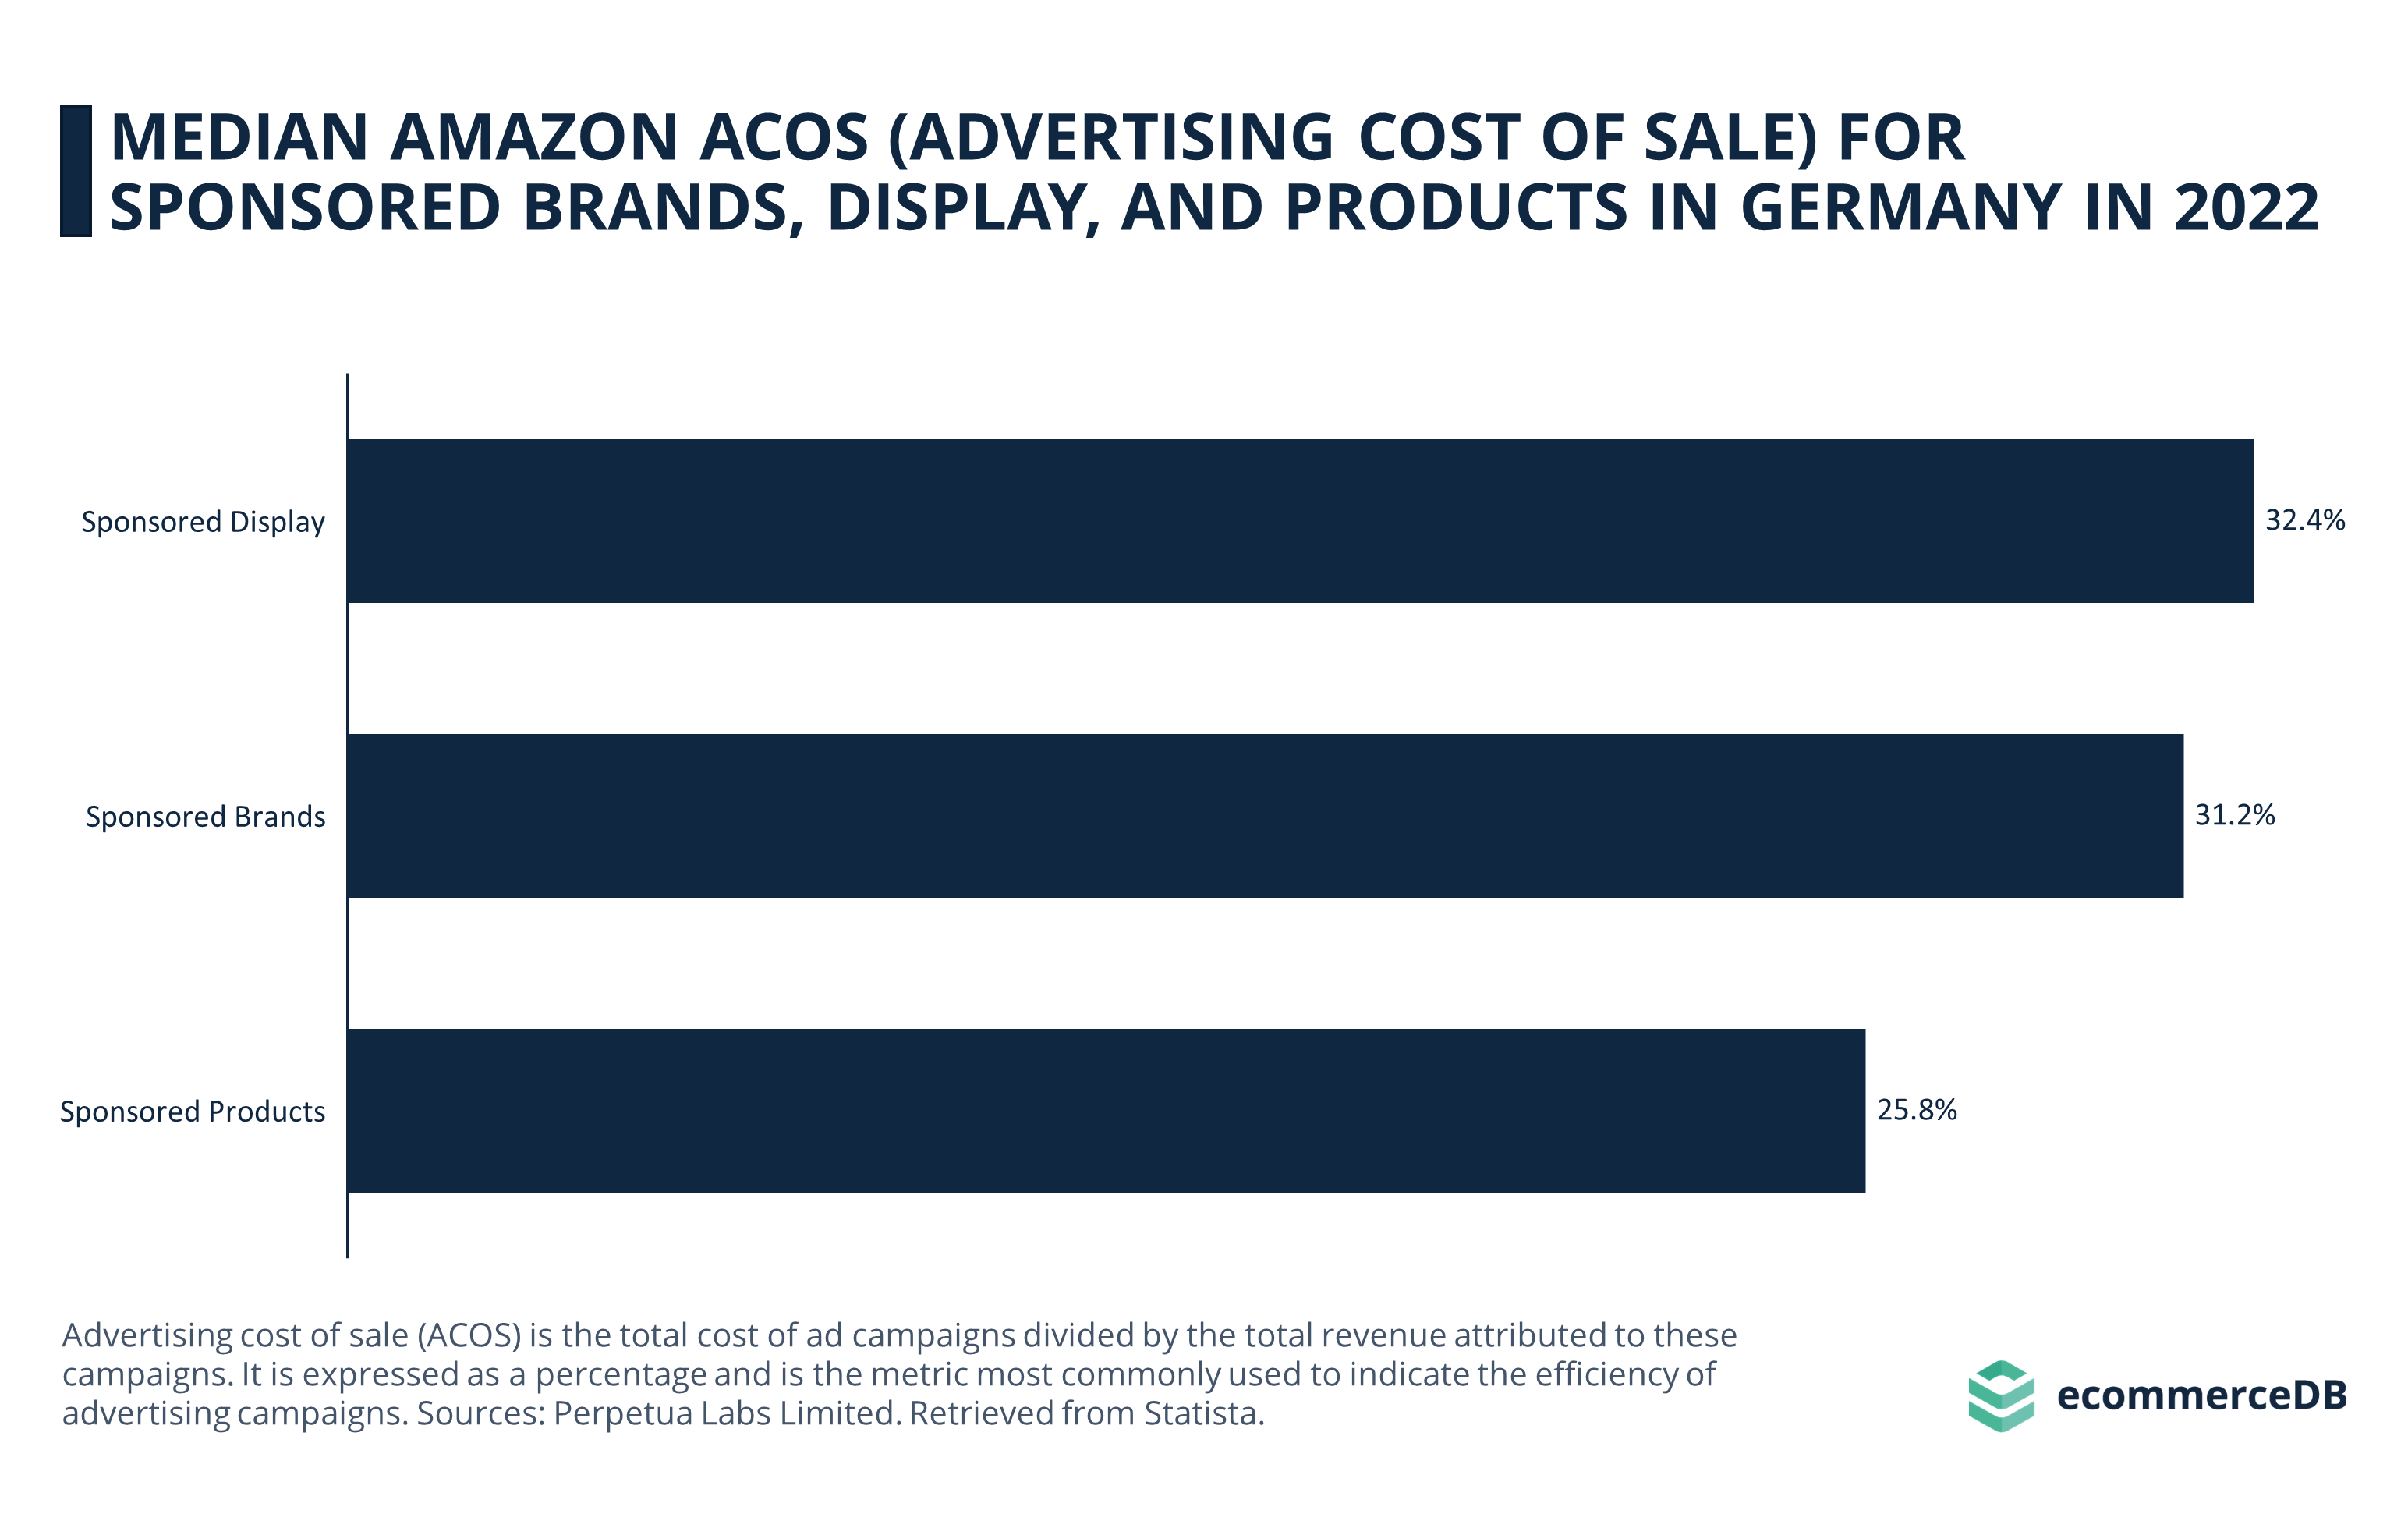 Median Amazon ACOS for 3 Ad Types in Germany